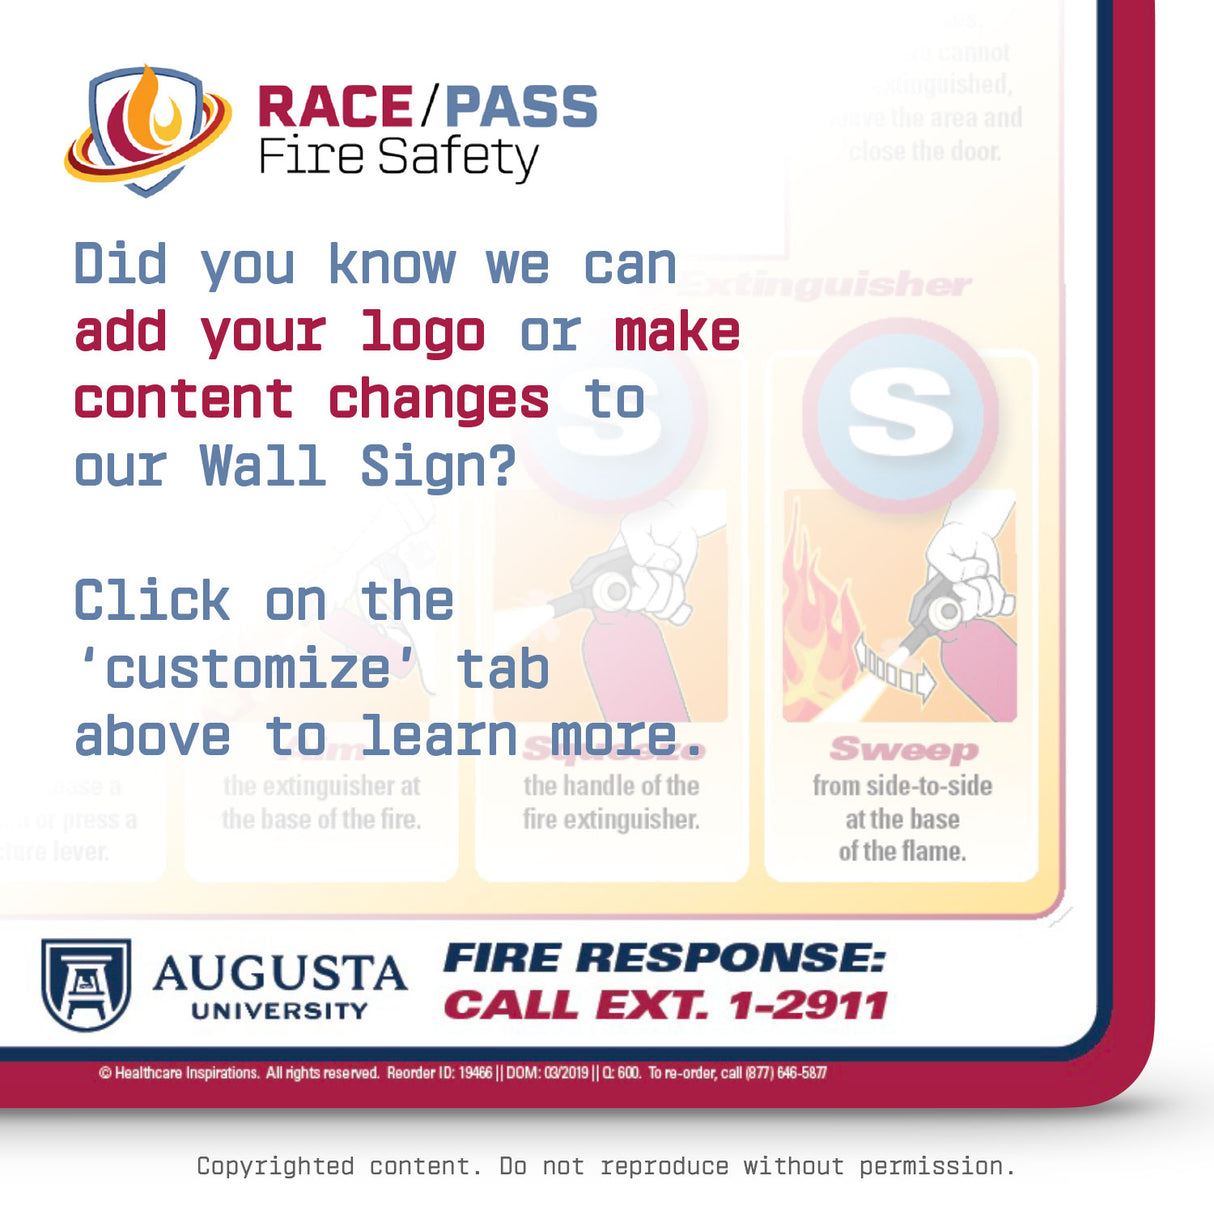 Did you know we offer customization options for our RACE/PASS Fire Safety Wall Sign?  You can add your logo or make content changes. Just click on the Customize tab above to learn more.